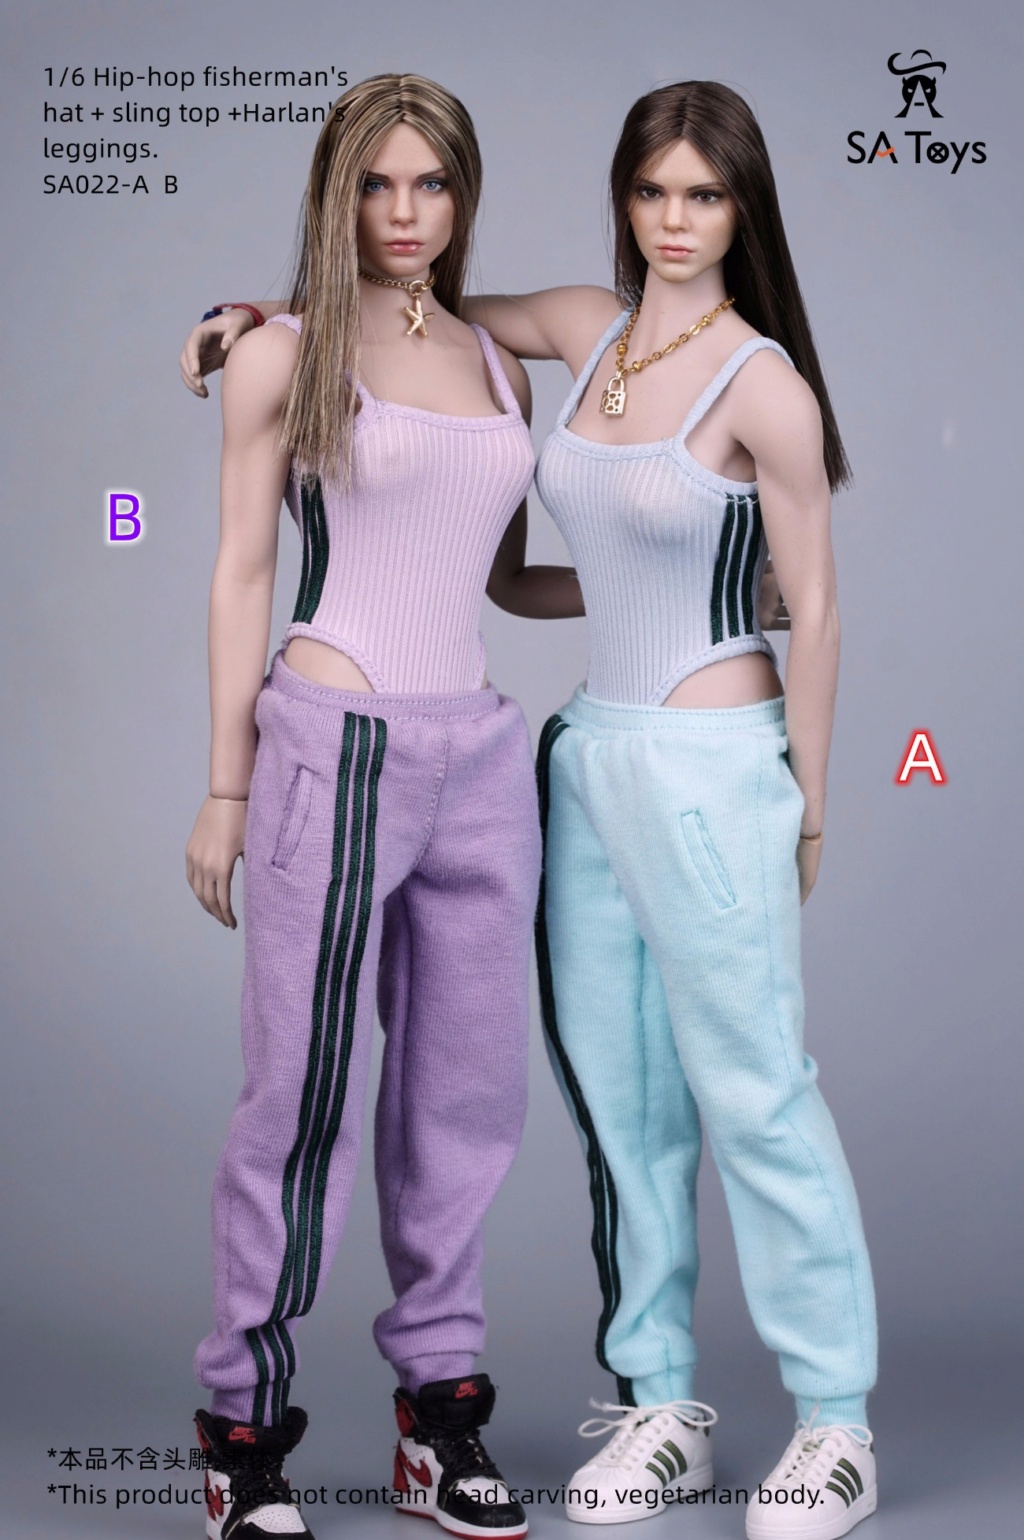 hiphop - NEW PRODUCT: SA Toys: 1/6 hip skirt / floral elastic skirt / fashionable sports style hooded sweater cover, hip-hop fisherman hat halter and footwear casual pants [variety optional] 21403110